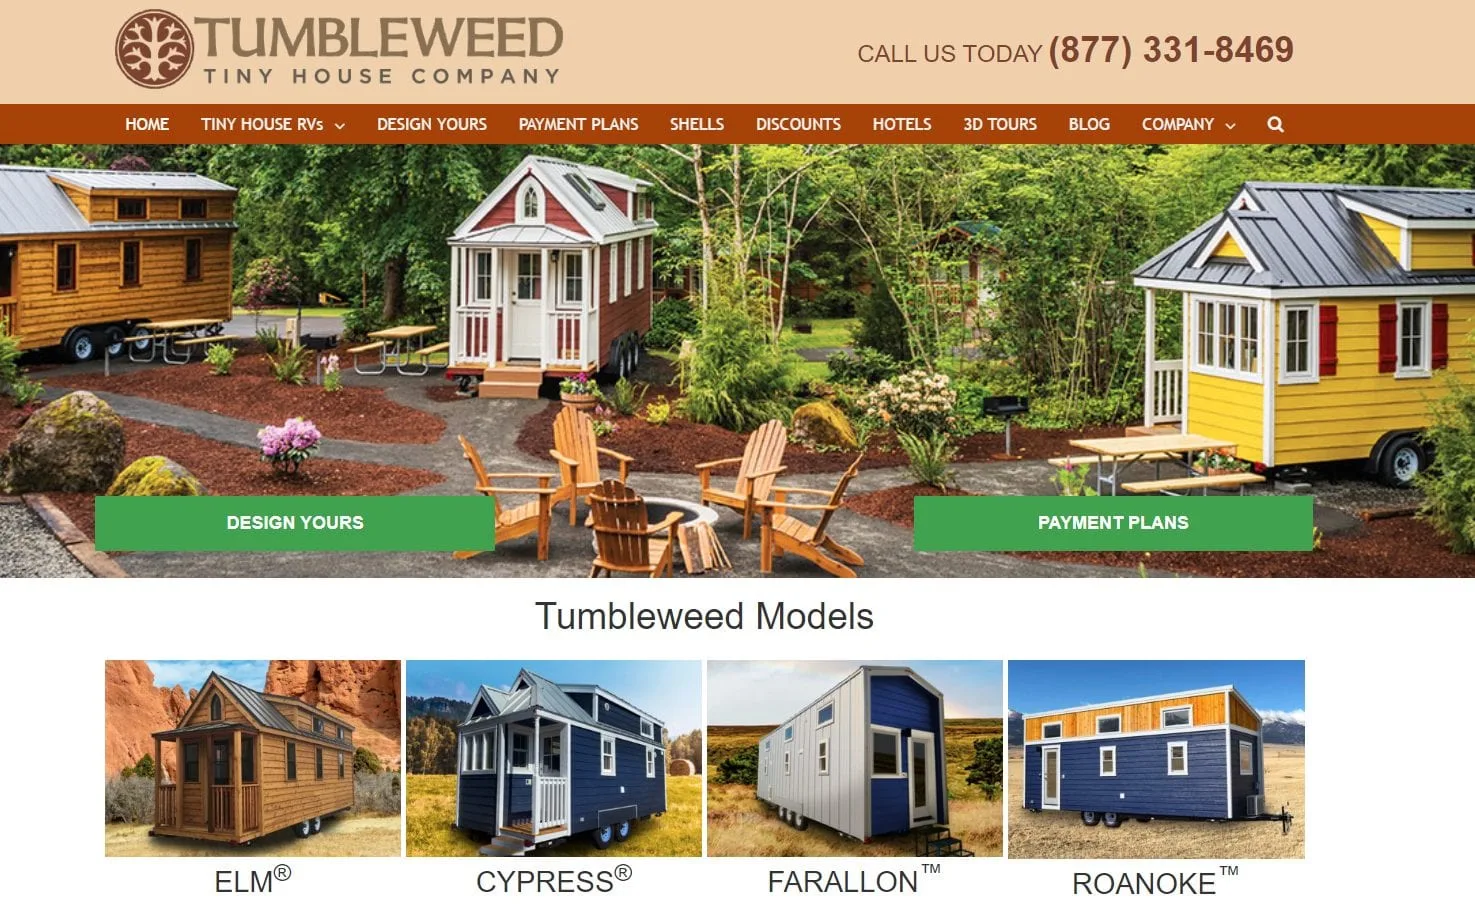 Tumbleweed tiny home website homepage featuring various models